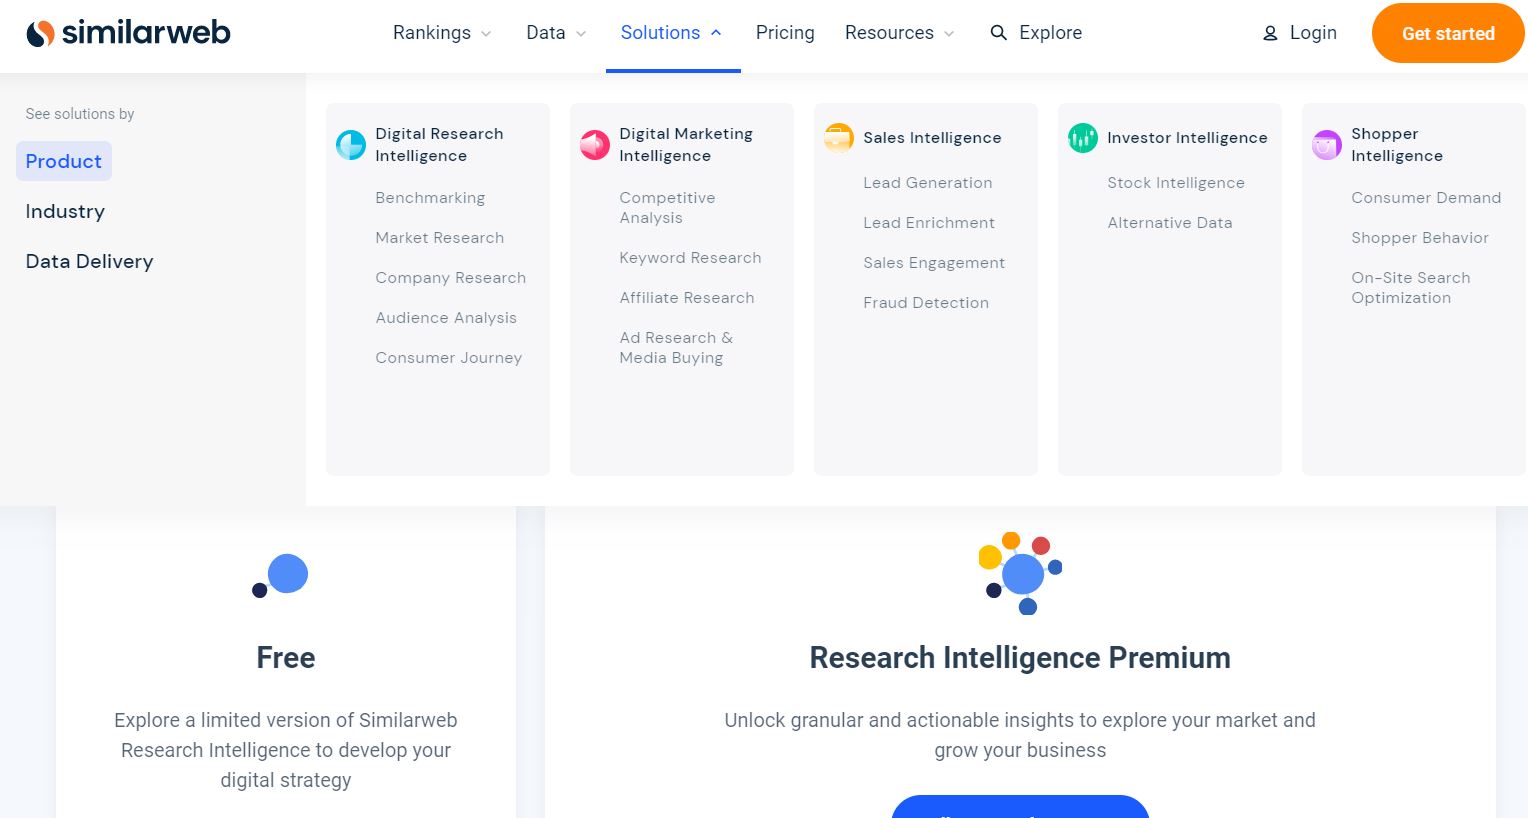 Product and solutions by similarweb on similarweb site